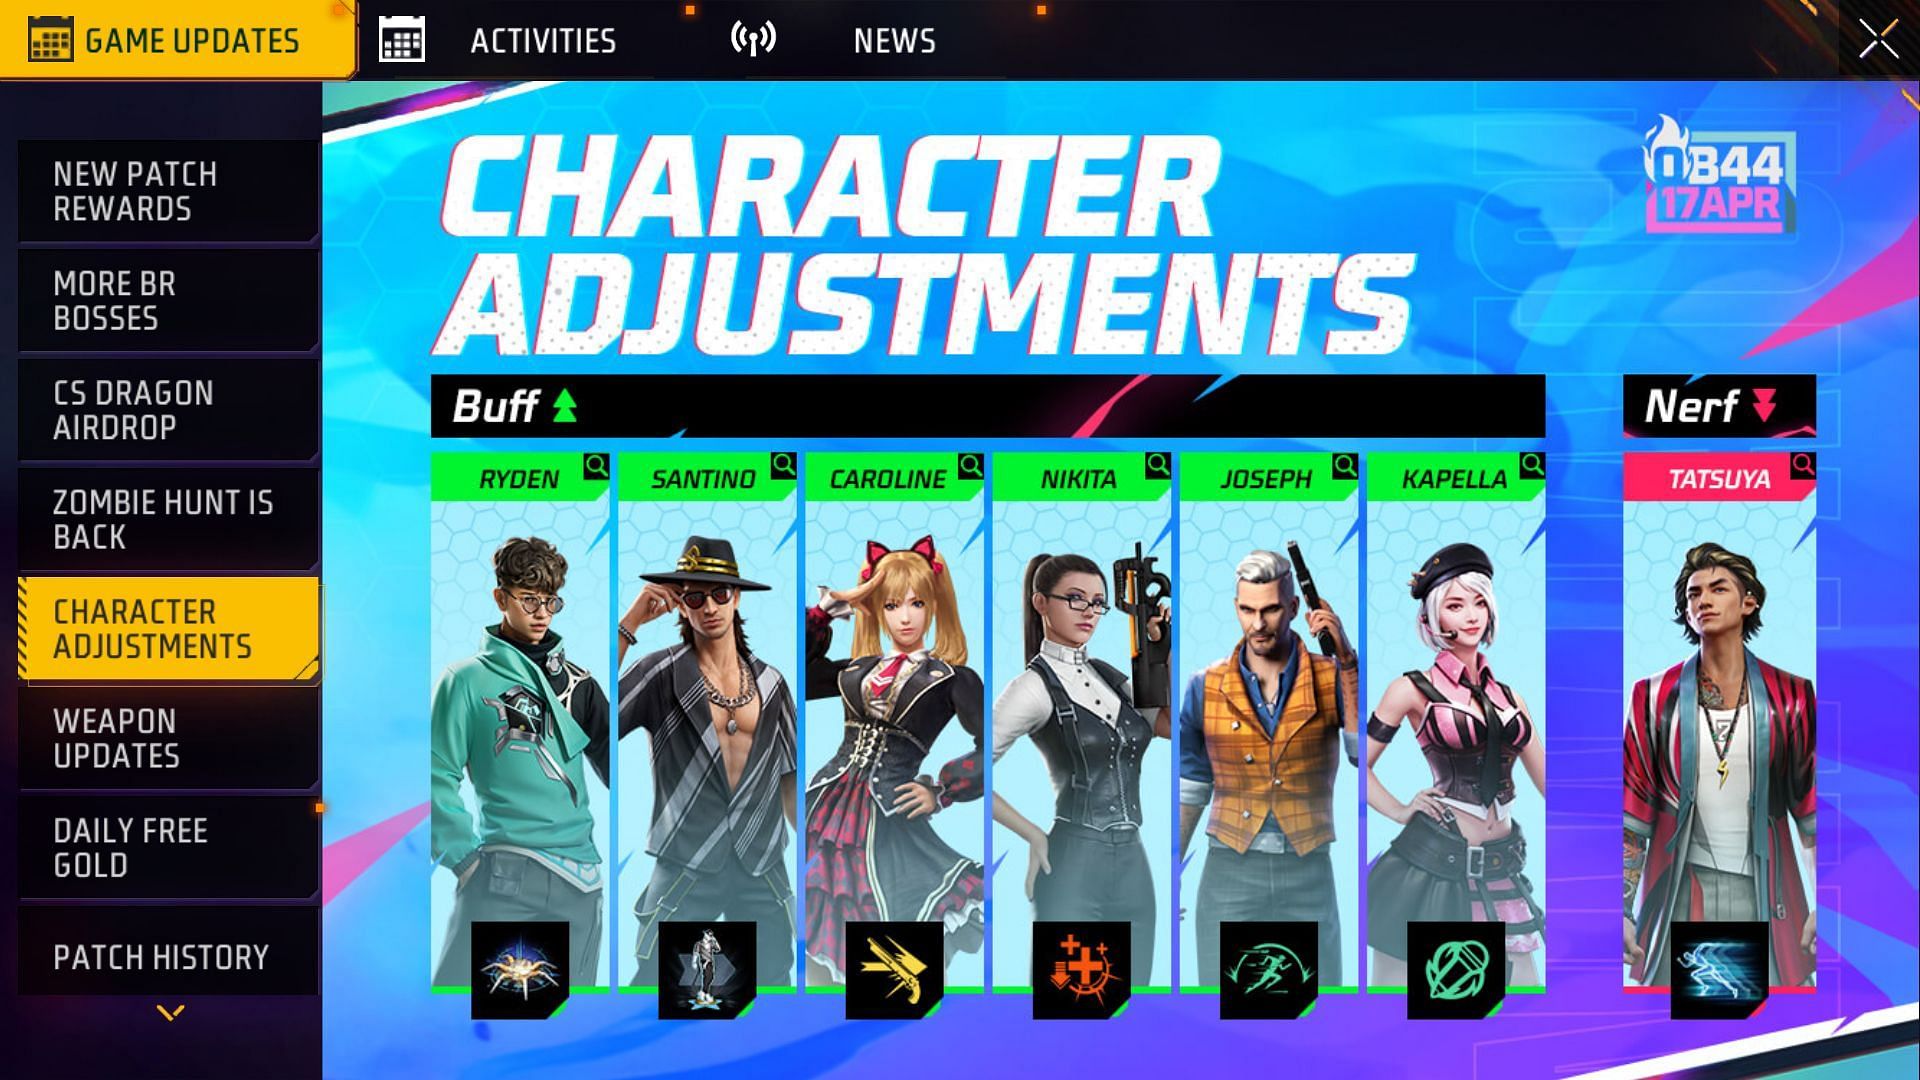 The character adjustments are one of the major highlights of the OB44 update (Image via Garena)